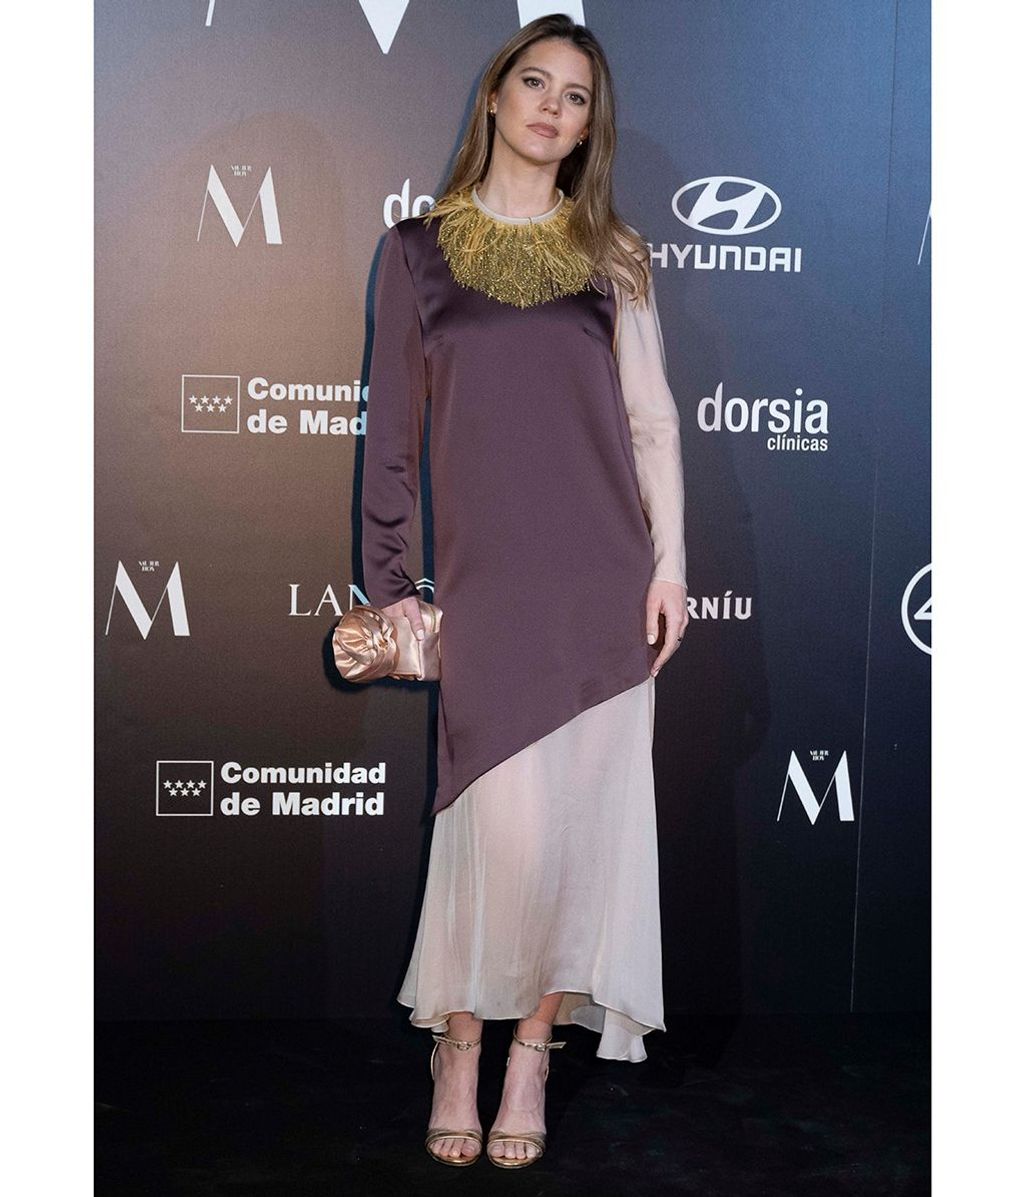 Isabelle Junot at photocall for 12 edition of Mujer Hoy awards 2021 in Madrid on Tuesday, 30 November 2021.